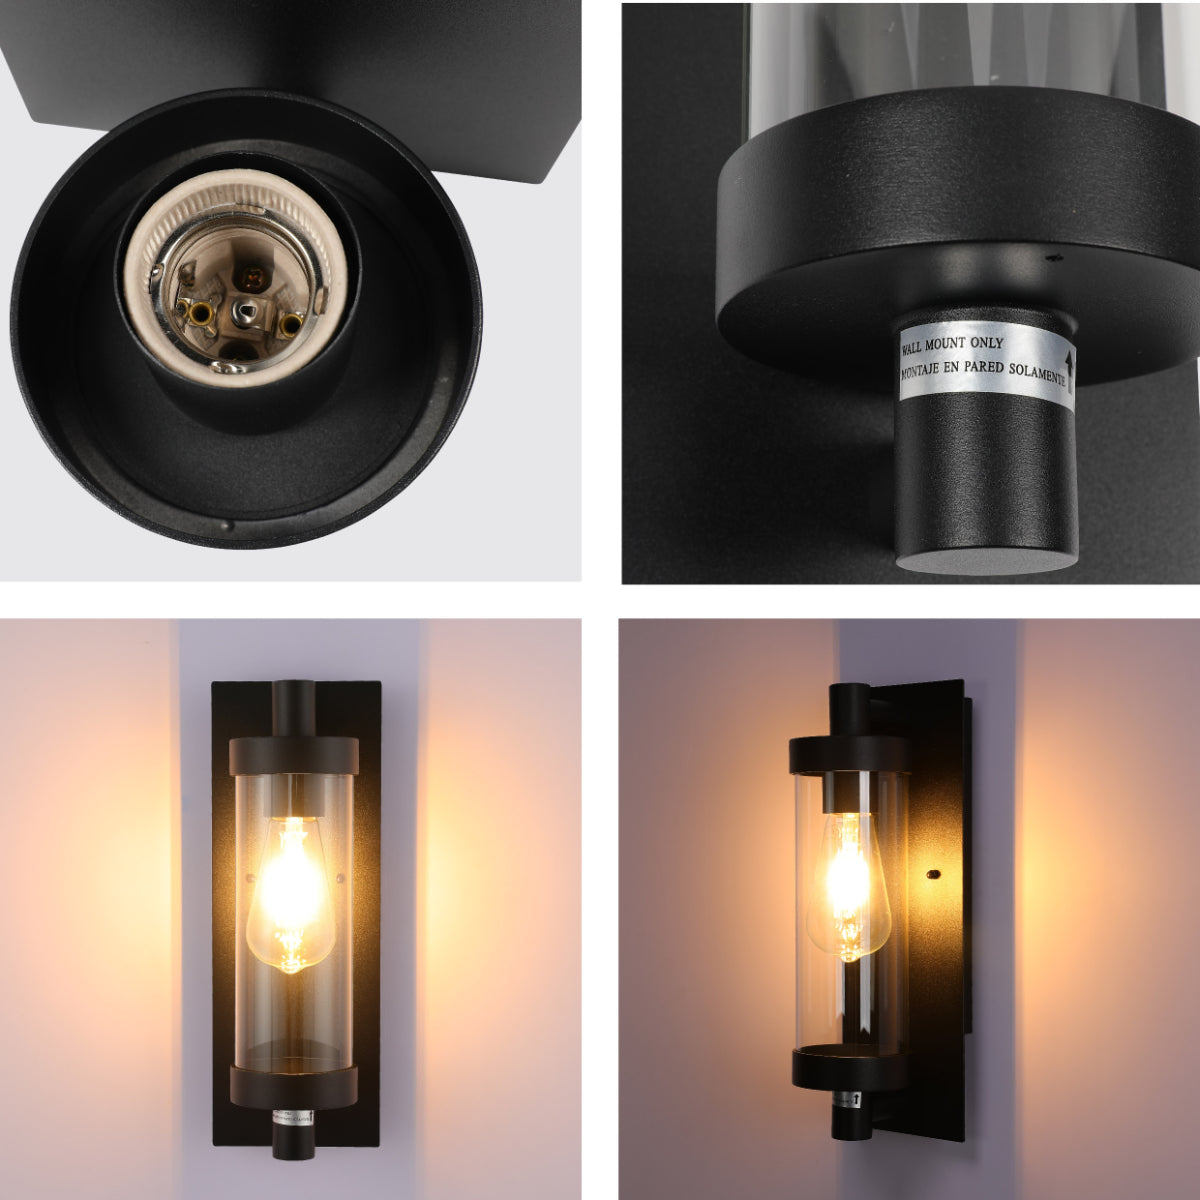 Close shots of Timeless Elegance Wall Sconce - Durable Glass & Aluminum, E27 Compatible Outdoor/Indoor Light 182-03413